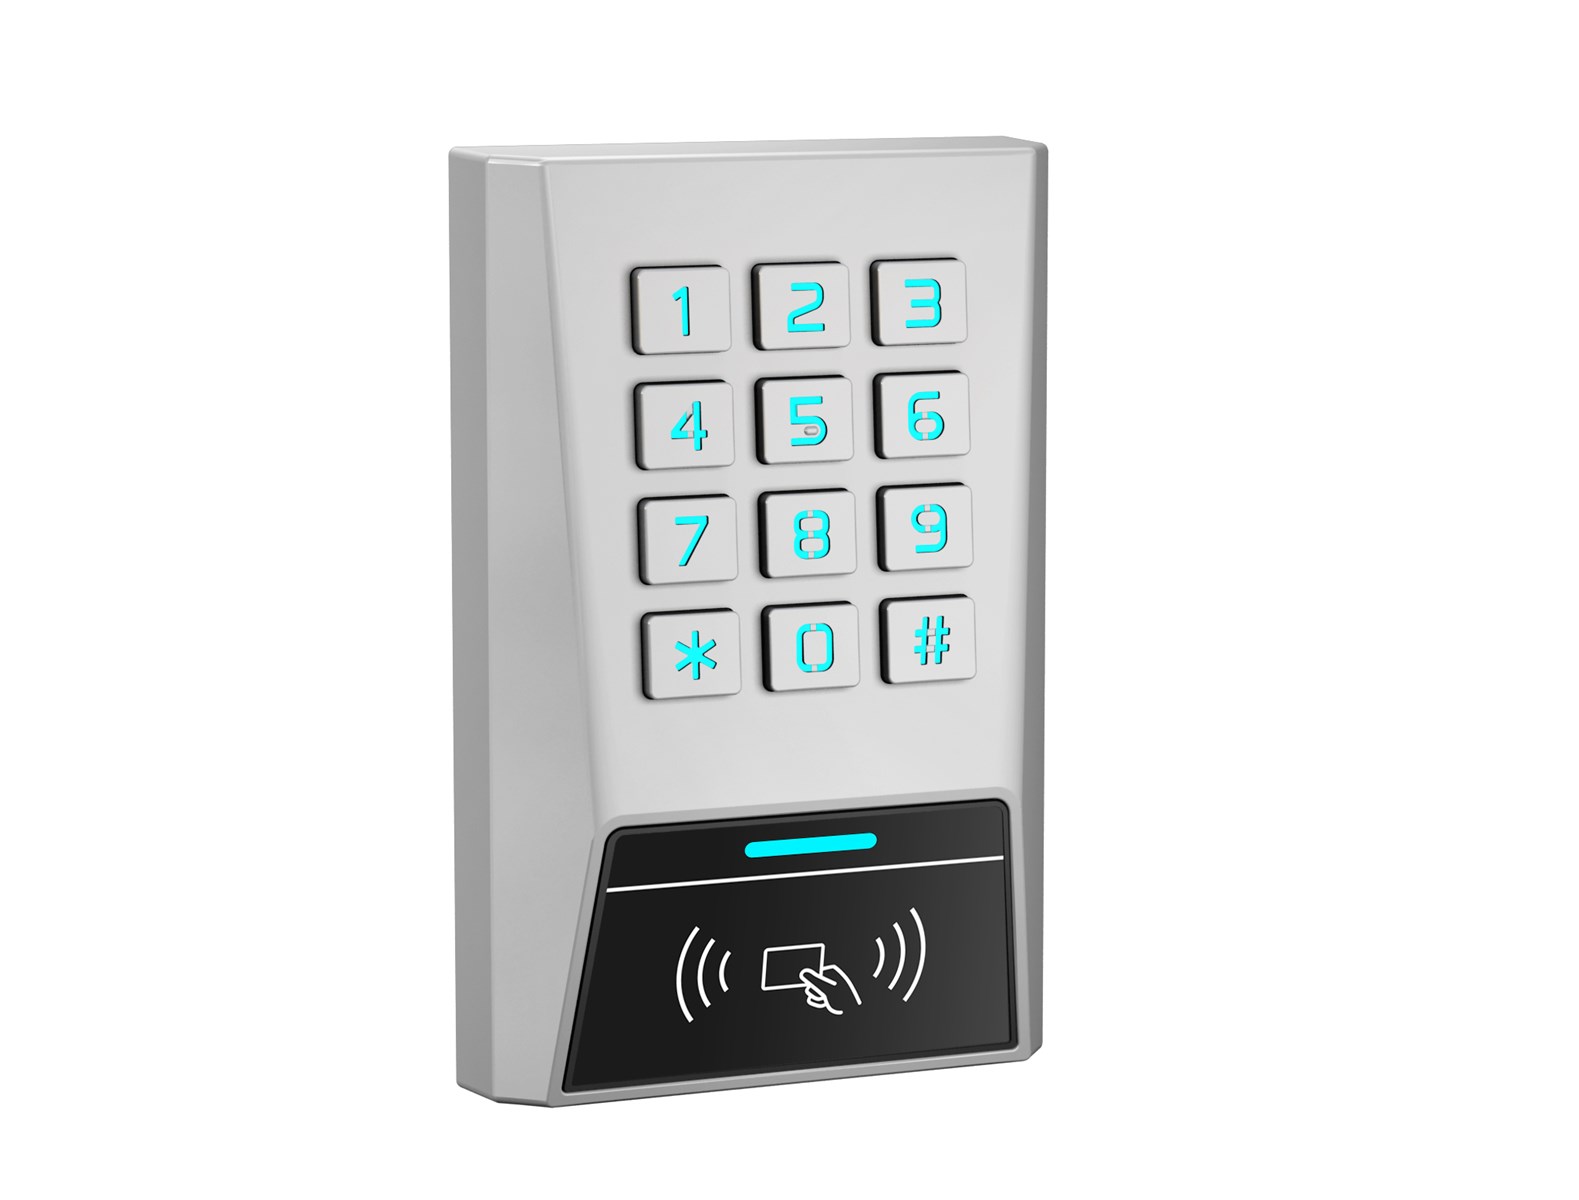 Easy Keypad Access Control with PIN Access